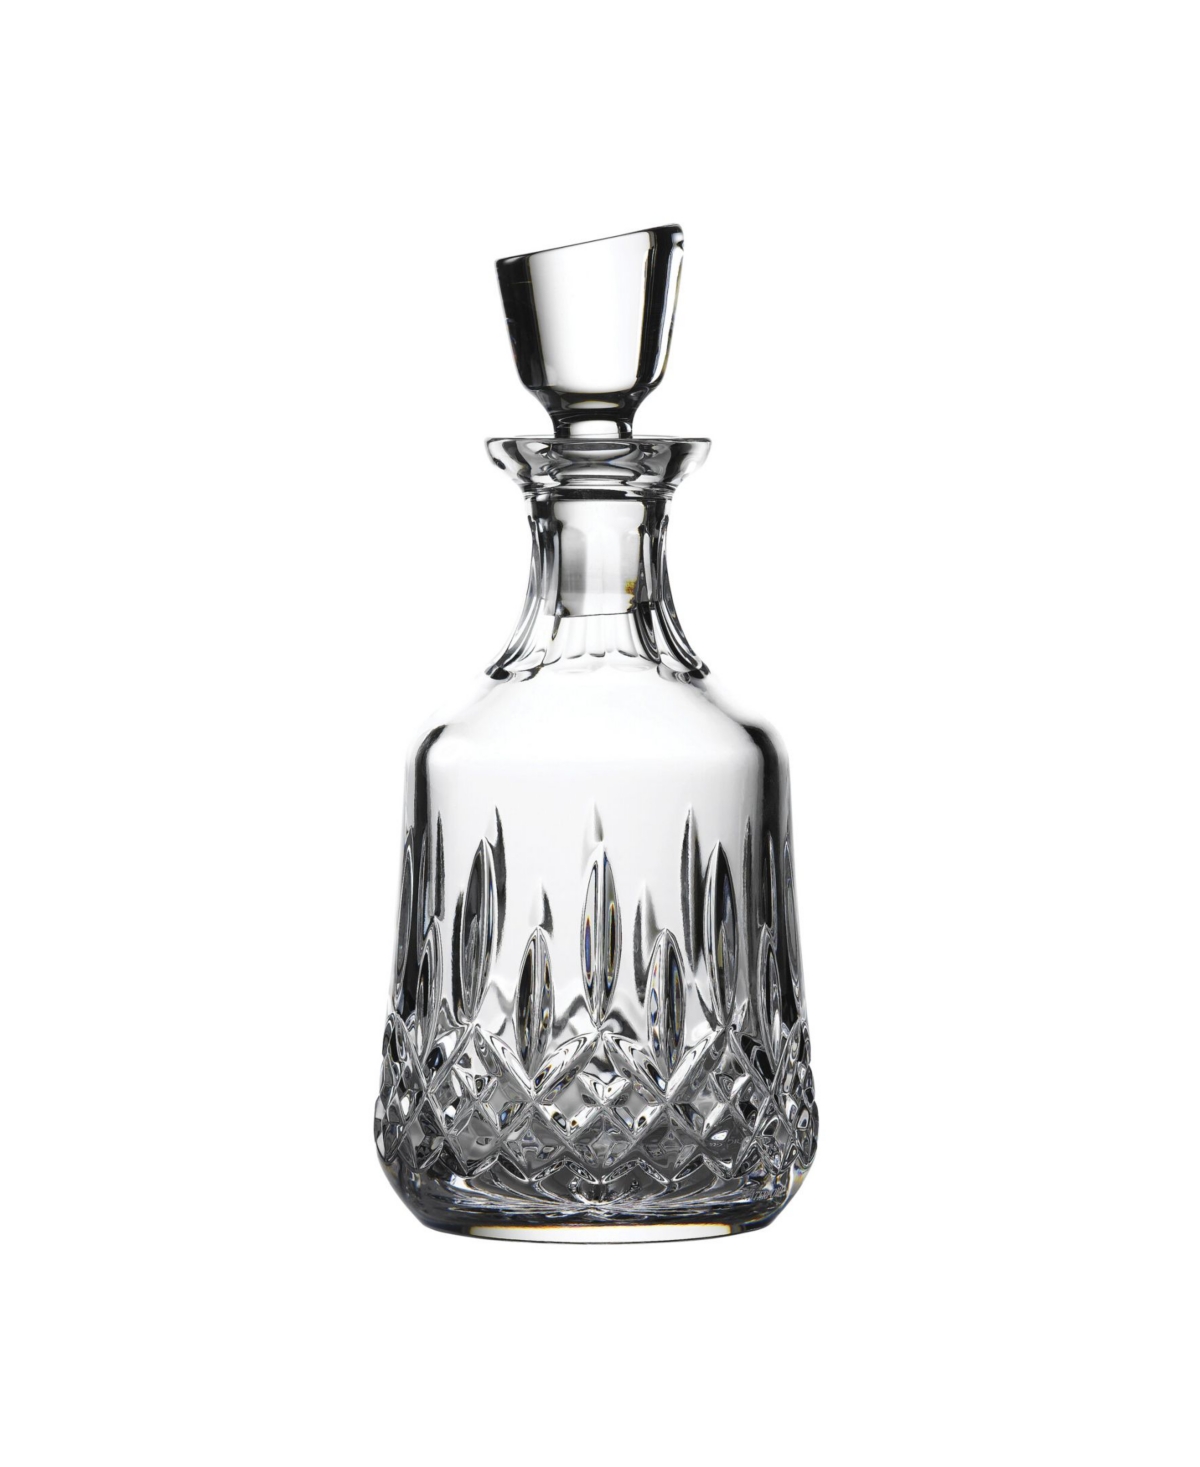 Waterford Lismore Small Bottle Decanter, 16 oz In Clear